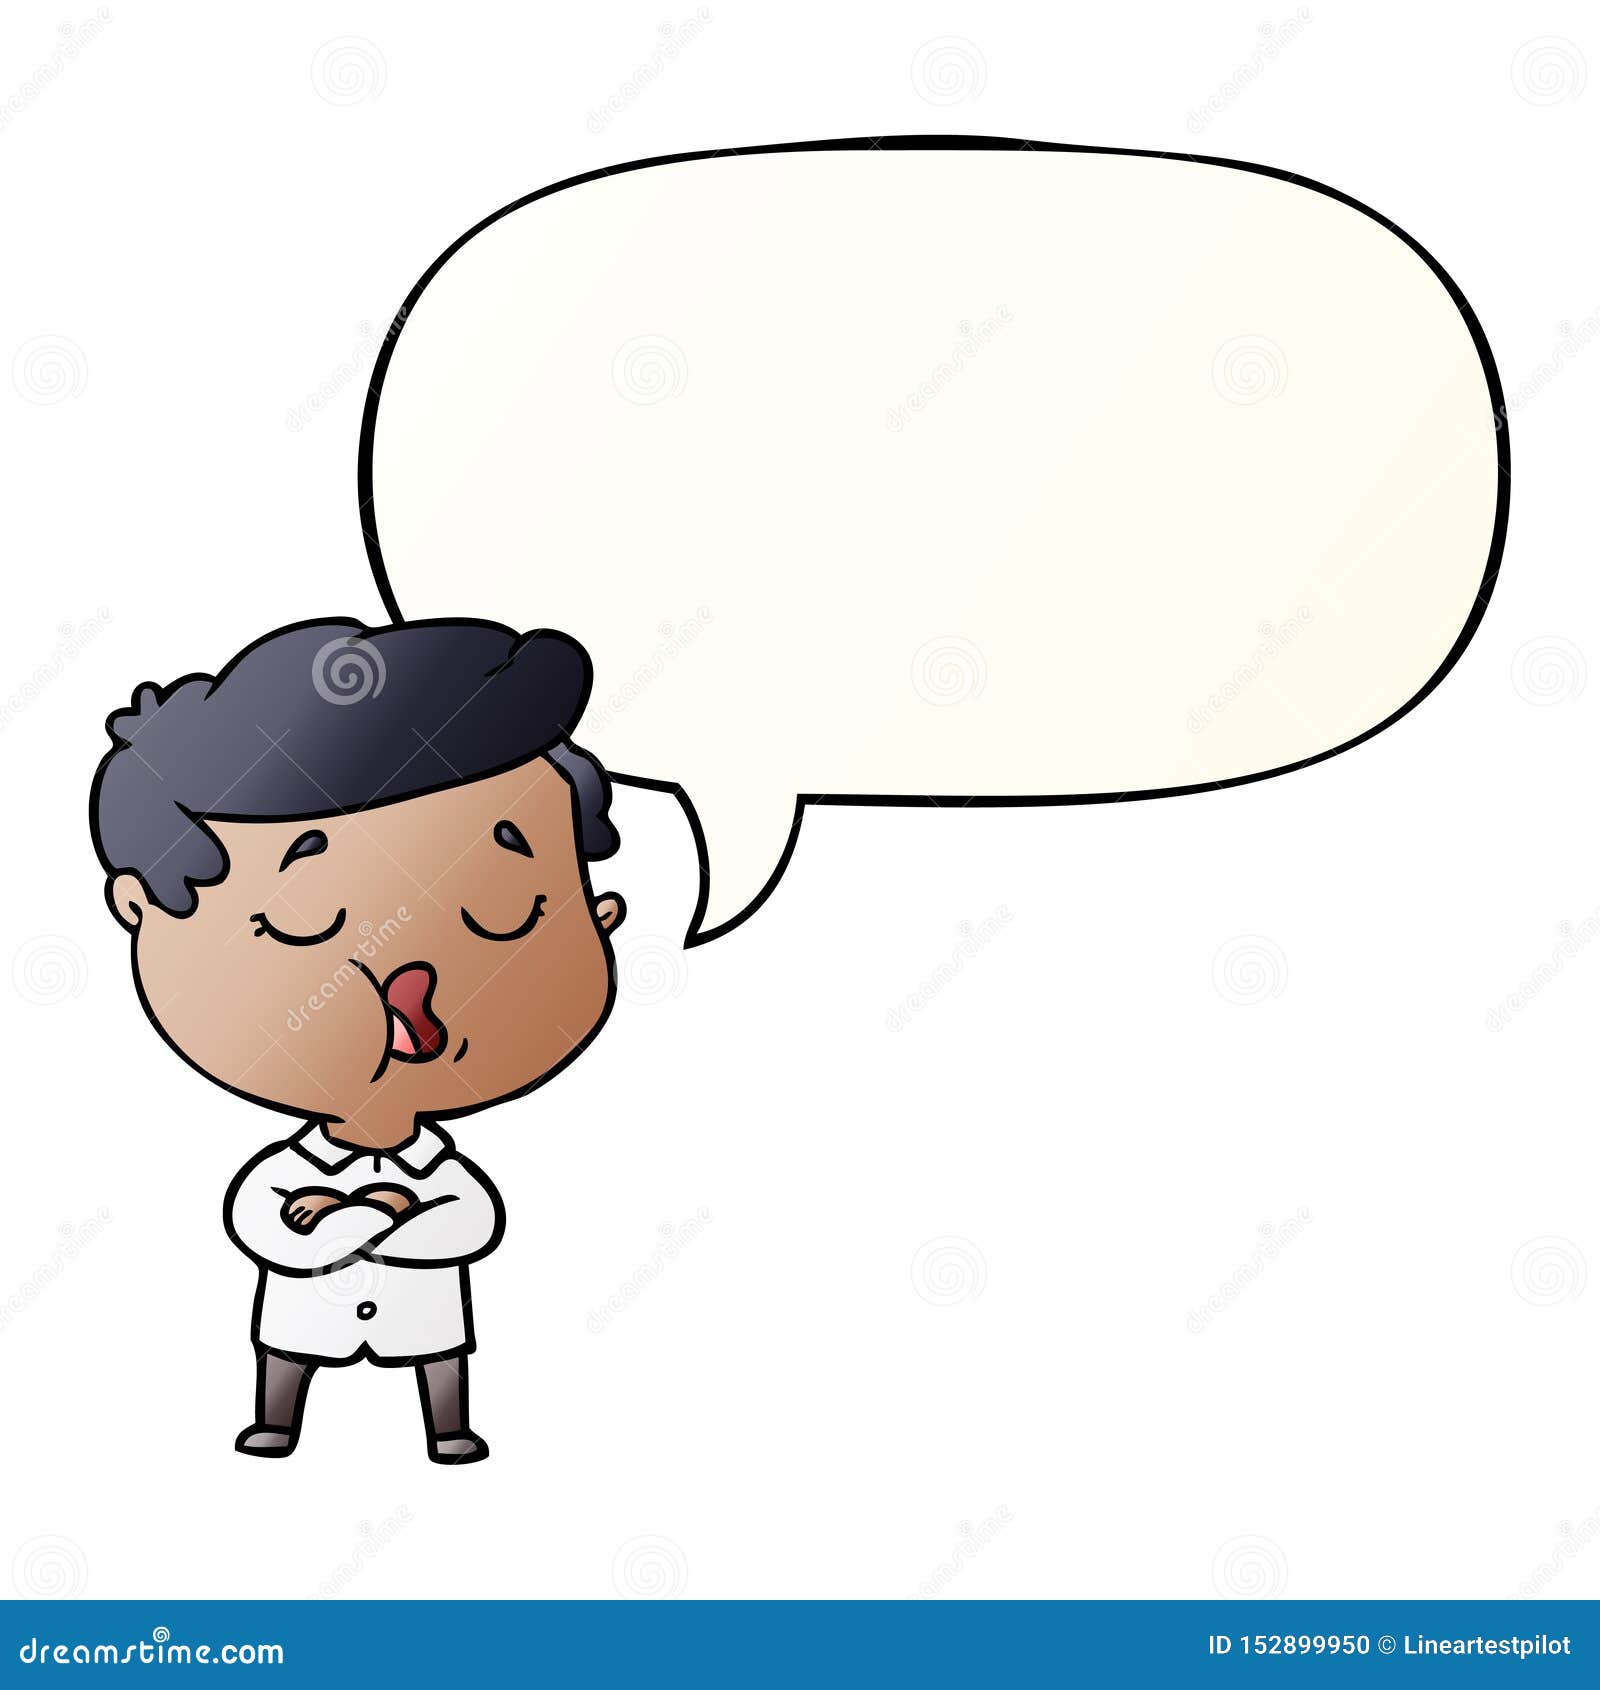 A Creative Cartoon Man Talking and Speech Bubble in Smooth Gradient Style  Stock Vector - Illustration of yawning, speaking: 152899950